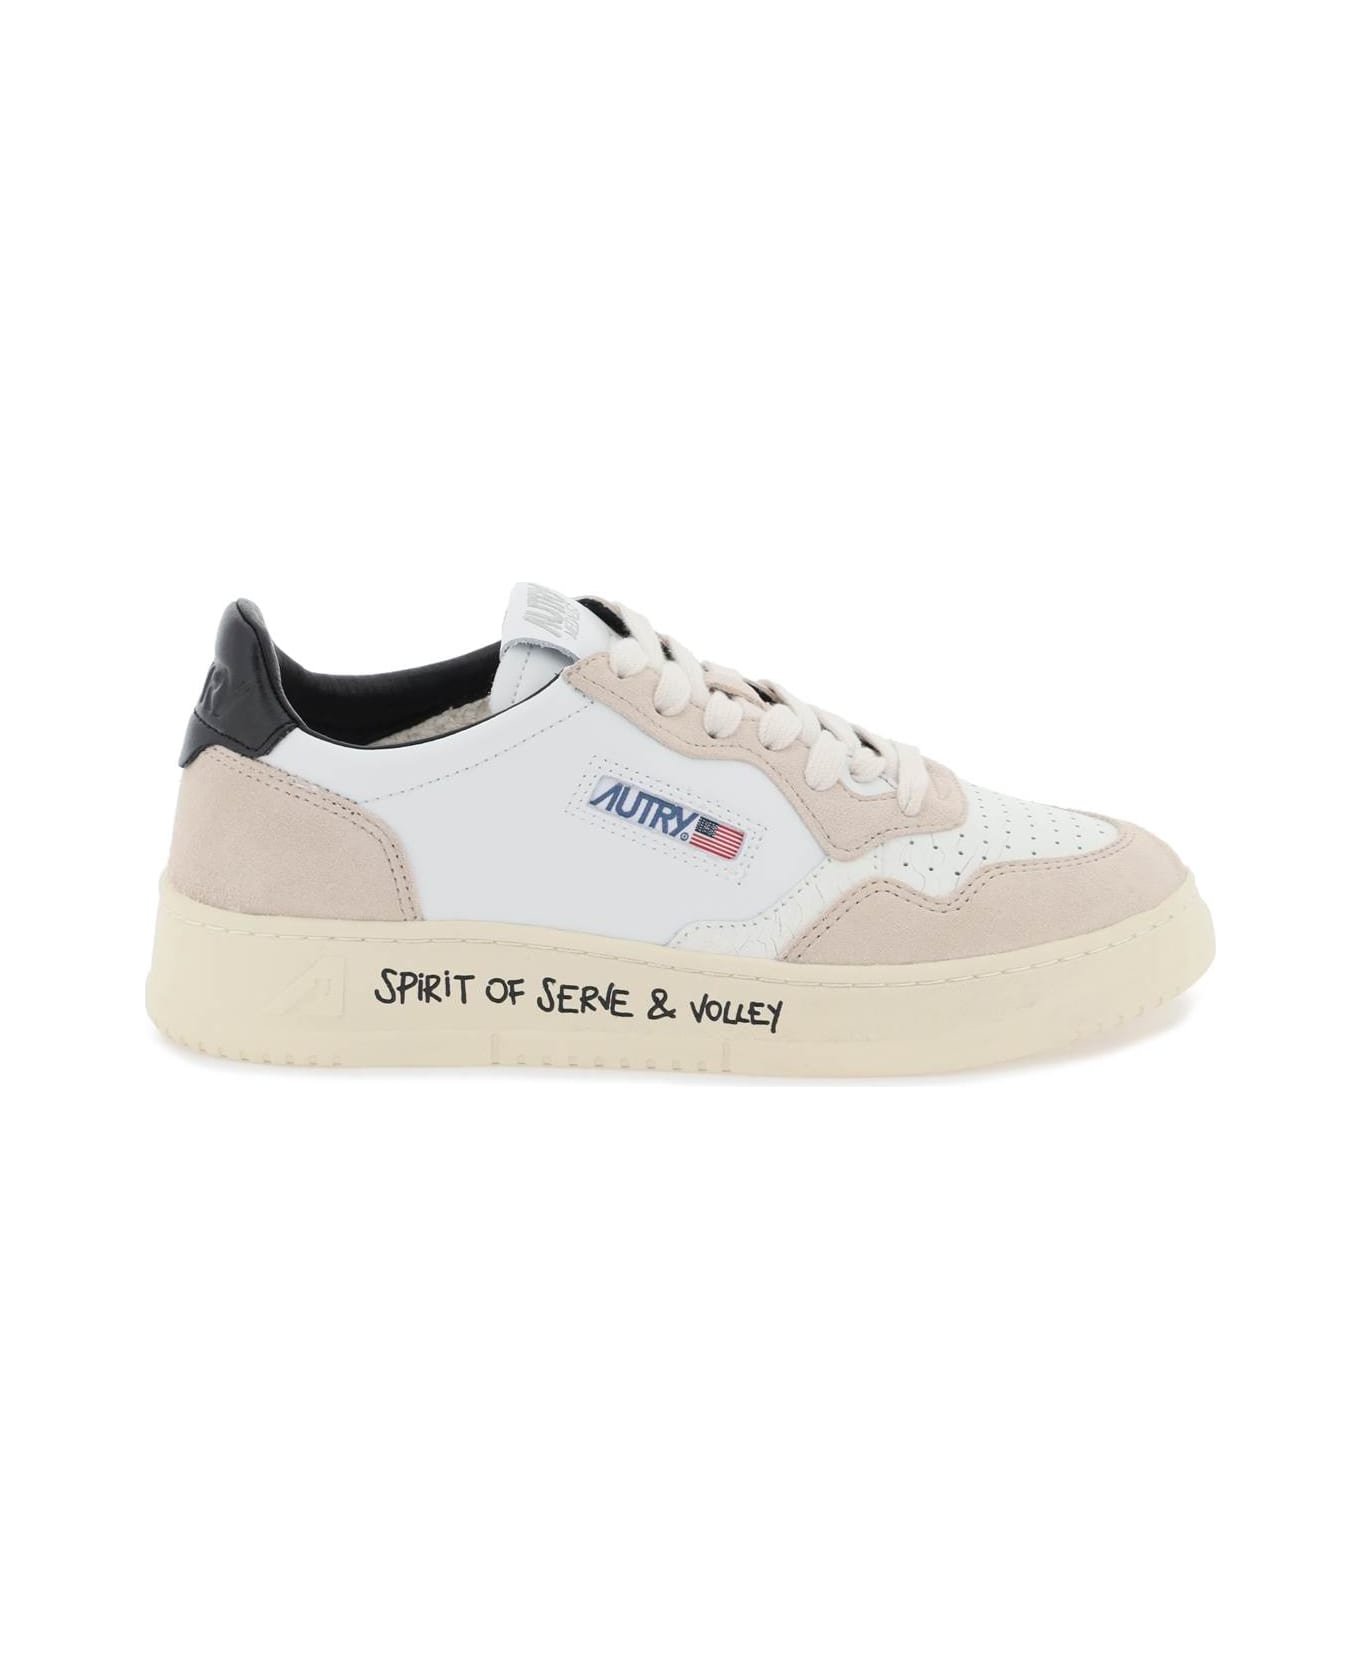 Autry Leather Medalist Low Sneakers - WHT SND BLK (Beige)